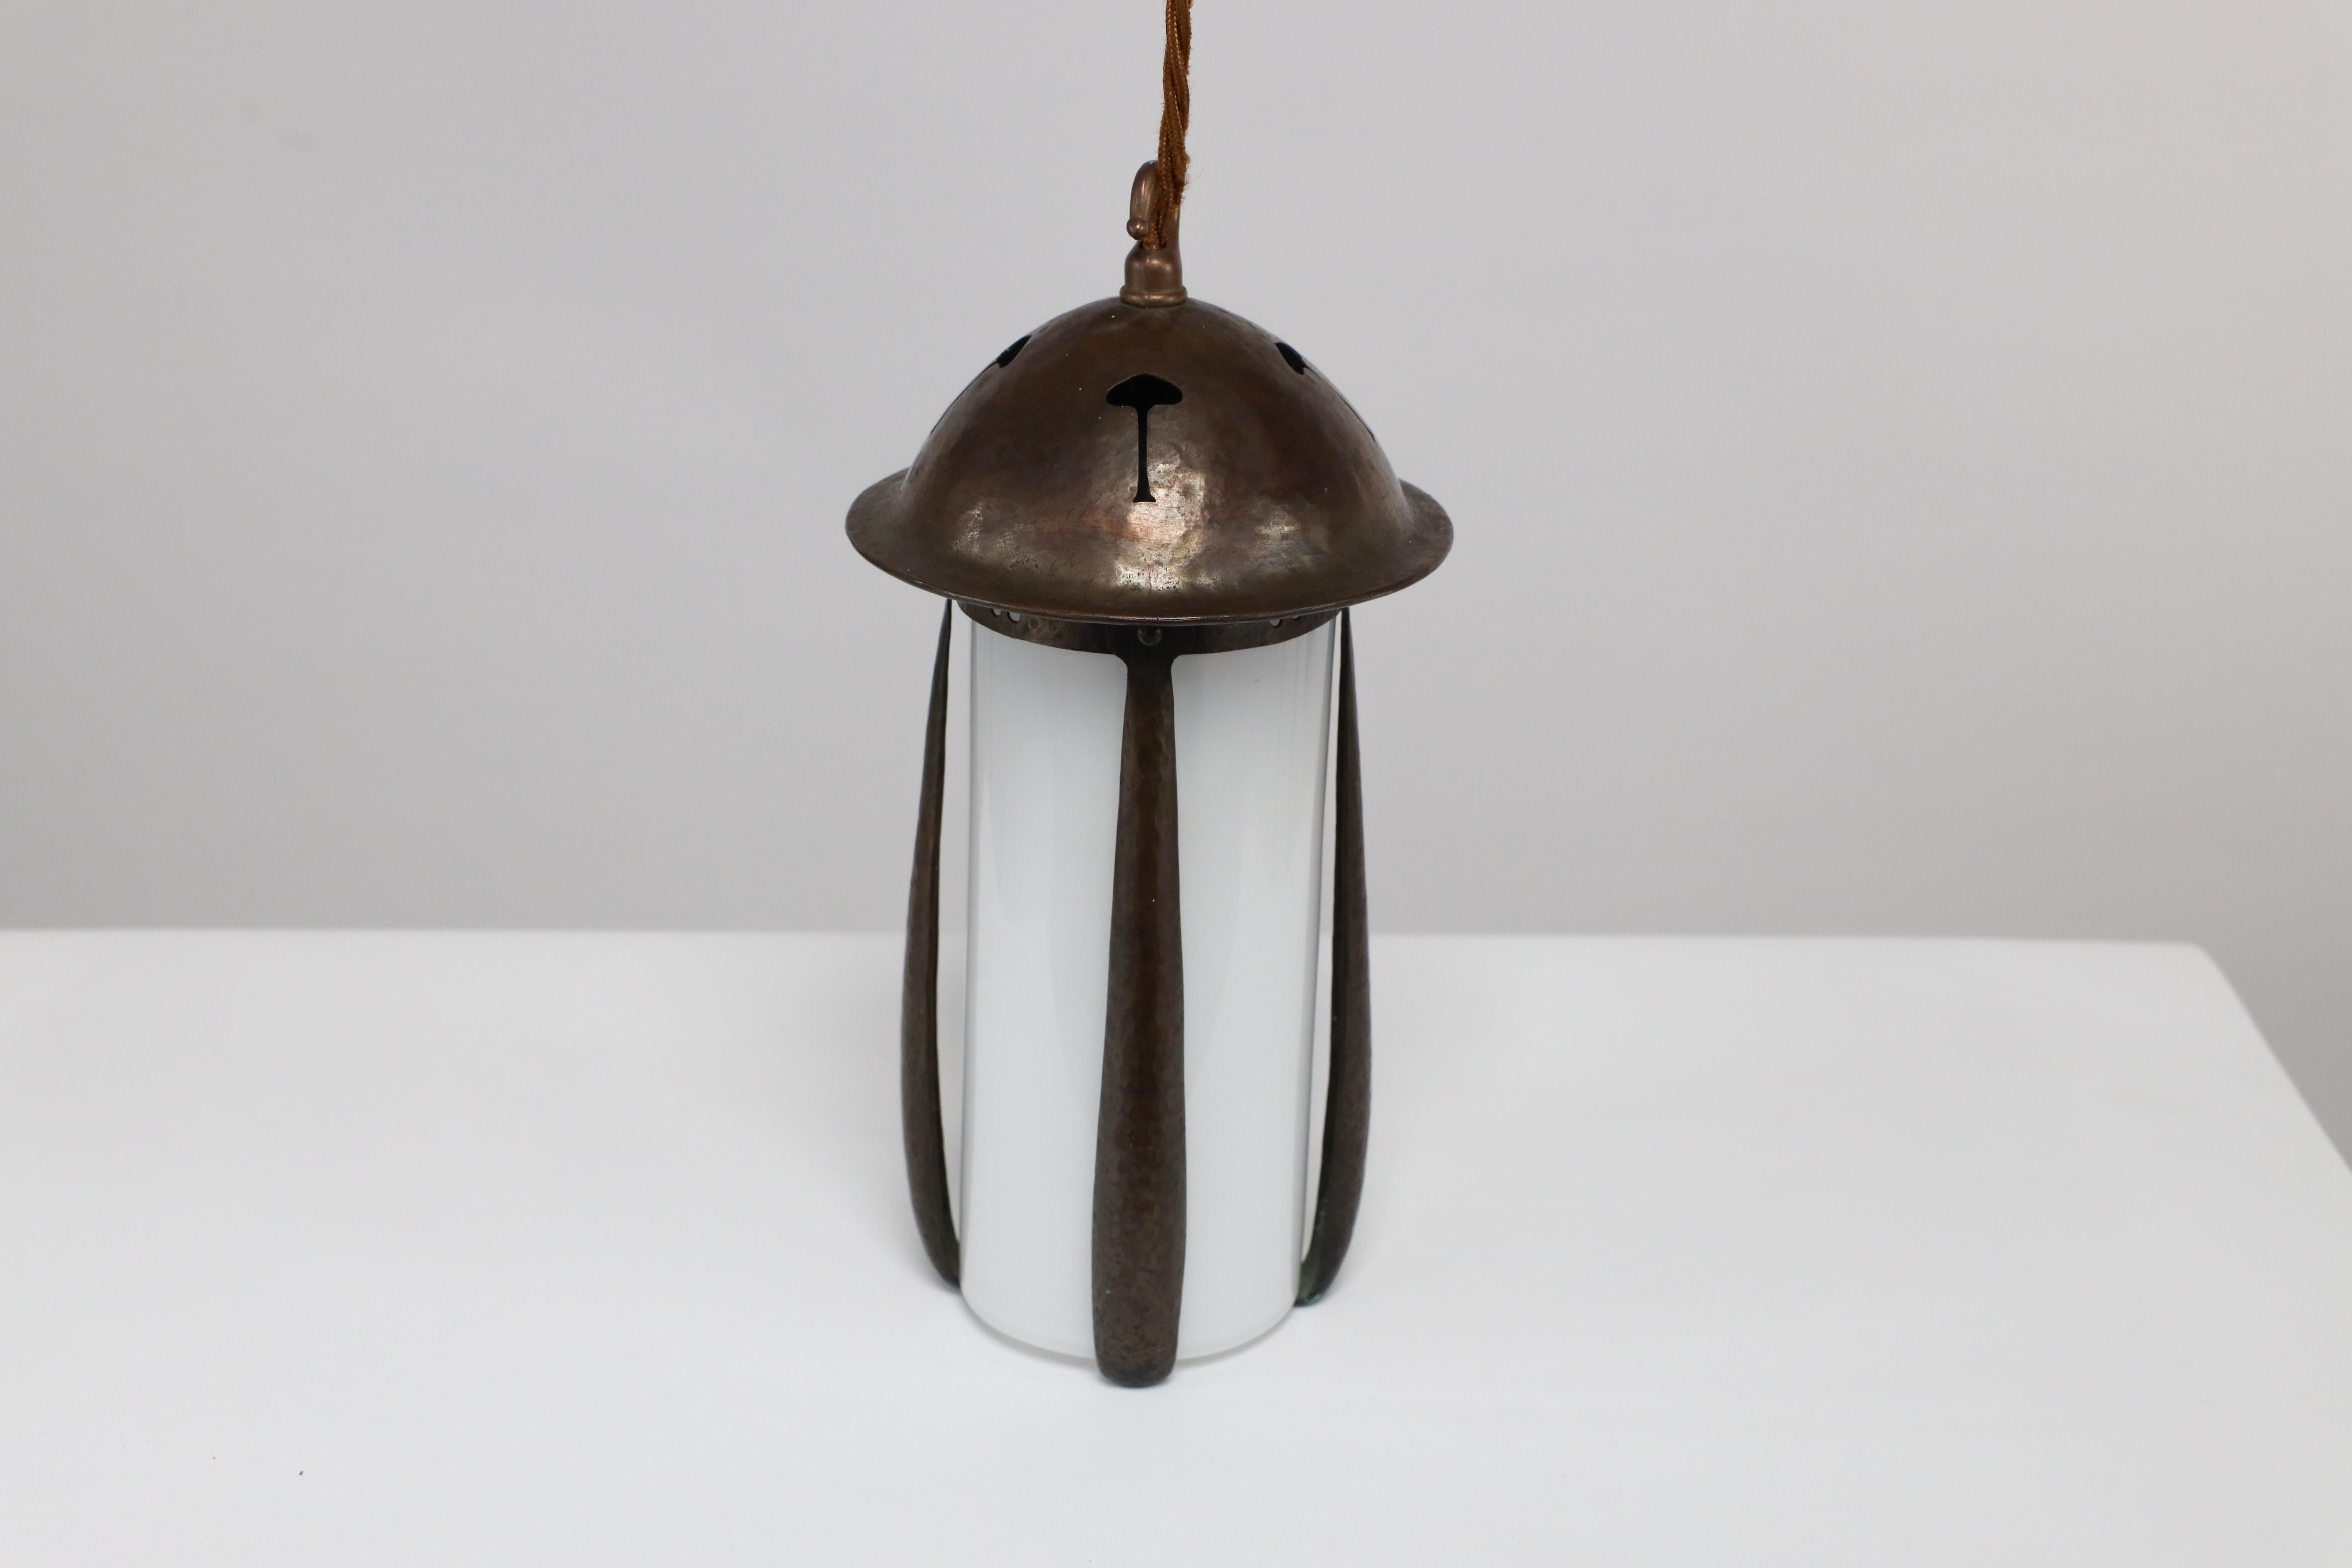 Gustav Stickley in the style of. An Arts and Crafts hand hammered patinated copper lantern with pierced flowers to the hat and pierced split hearts just below the hat, with a milky glass liner that is held in place by the upturns at the bottom of